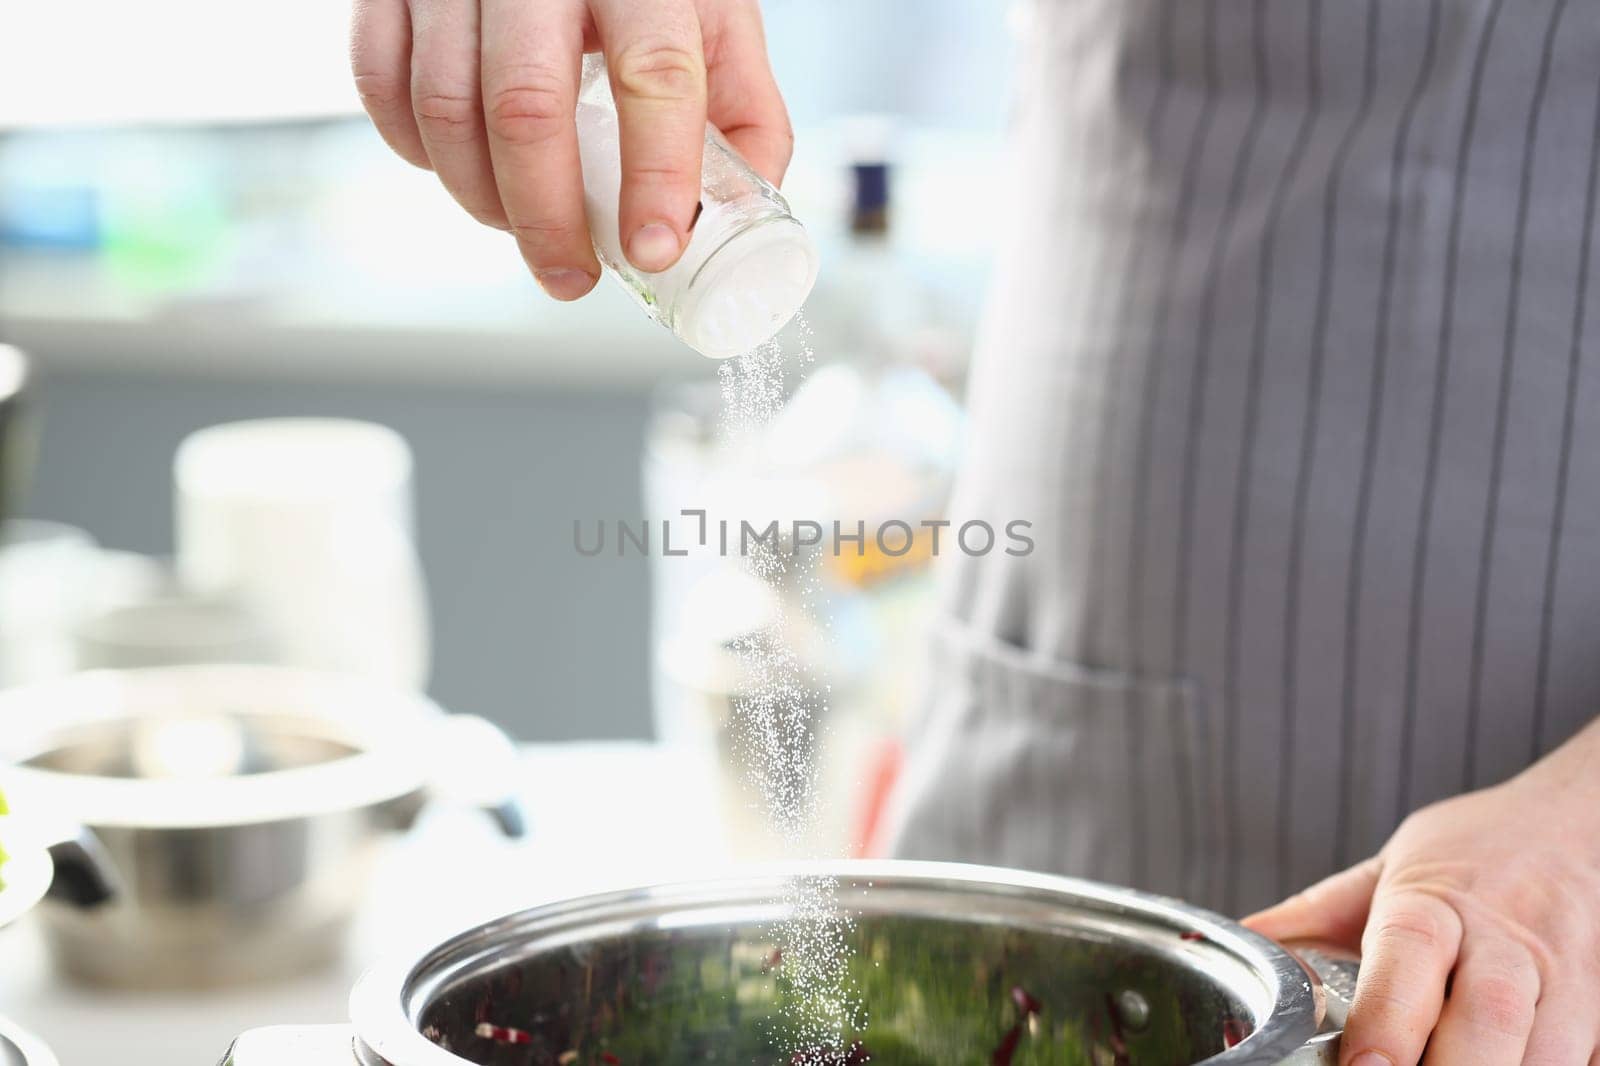 Cook pours salt into pan in kitchen by kuprevich